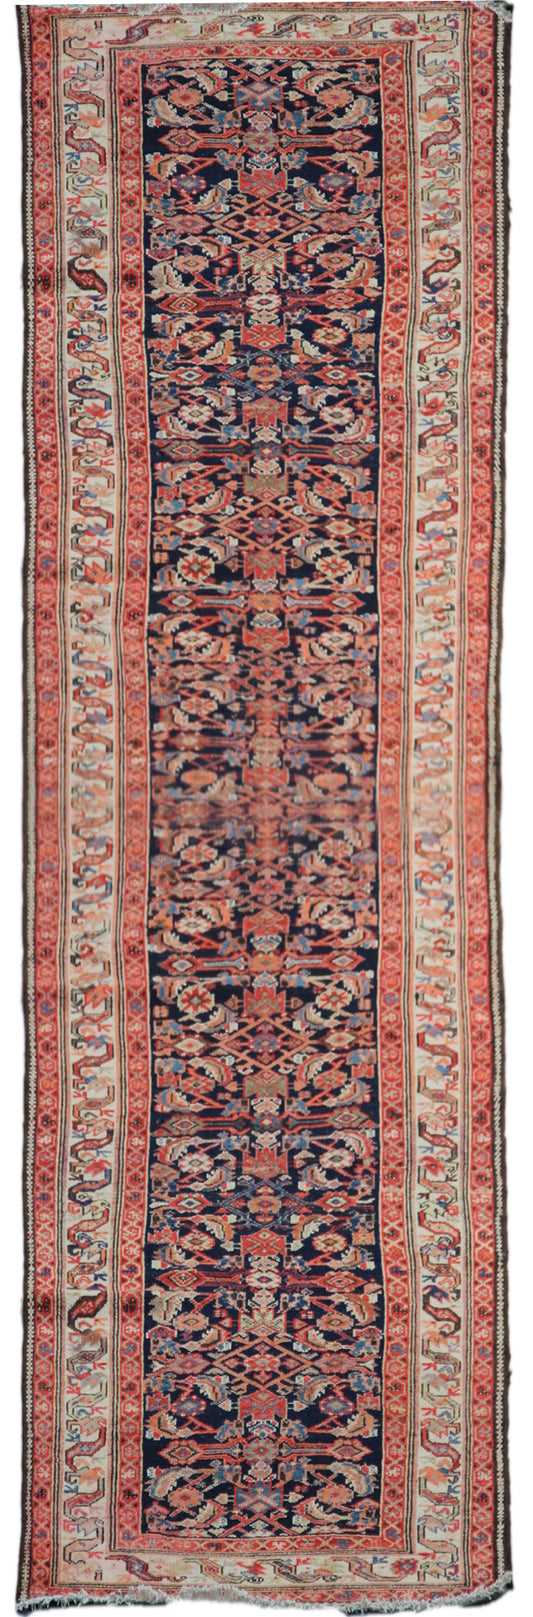 3'x17' Antique And Semi Antique Malayer Long Runner Rug